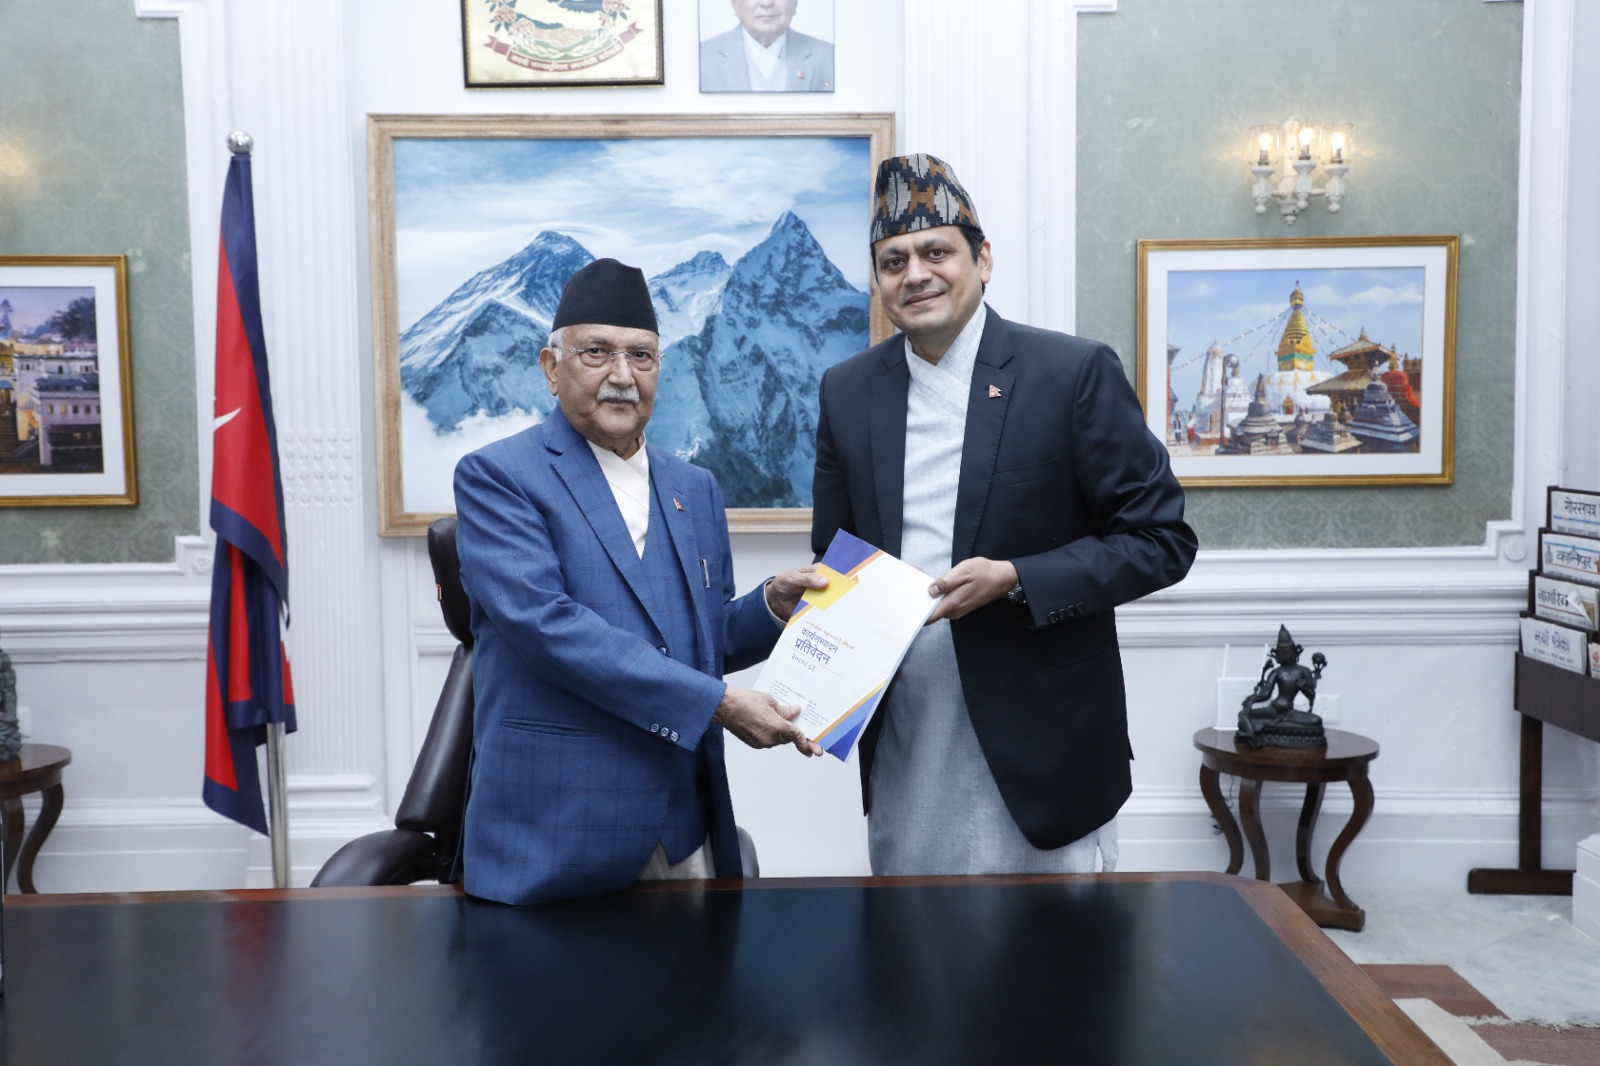 CEO Bhatta briefs Prime Minister Oli on successful completion of Investment Board’s strategic goals